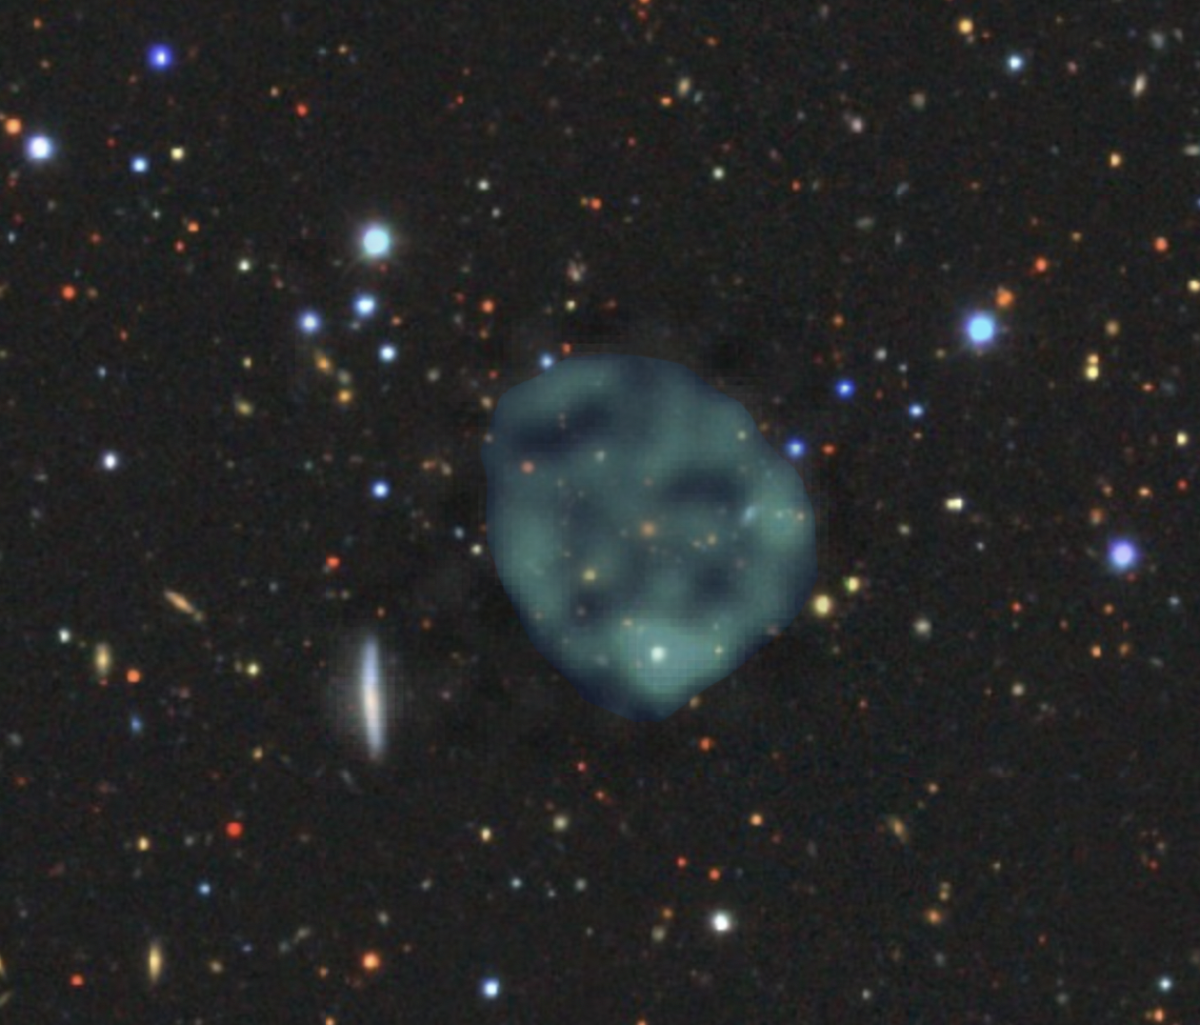 ORC 1 with a potentially related orange galaxy in the center.